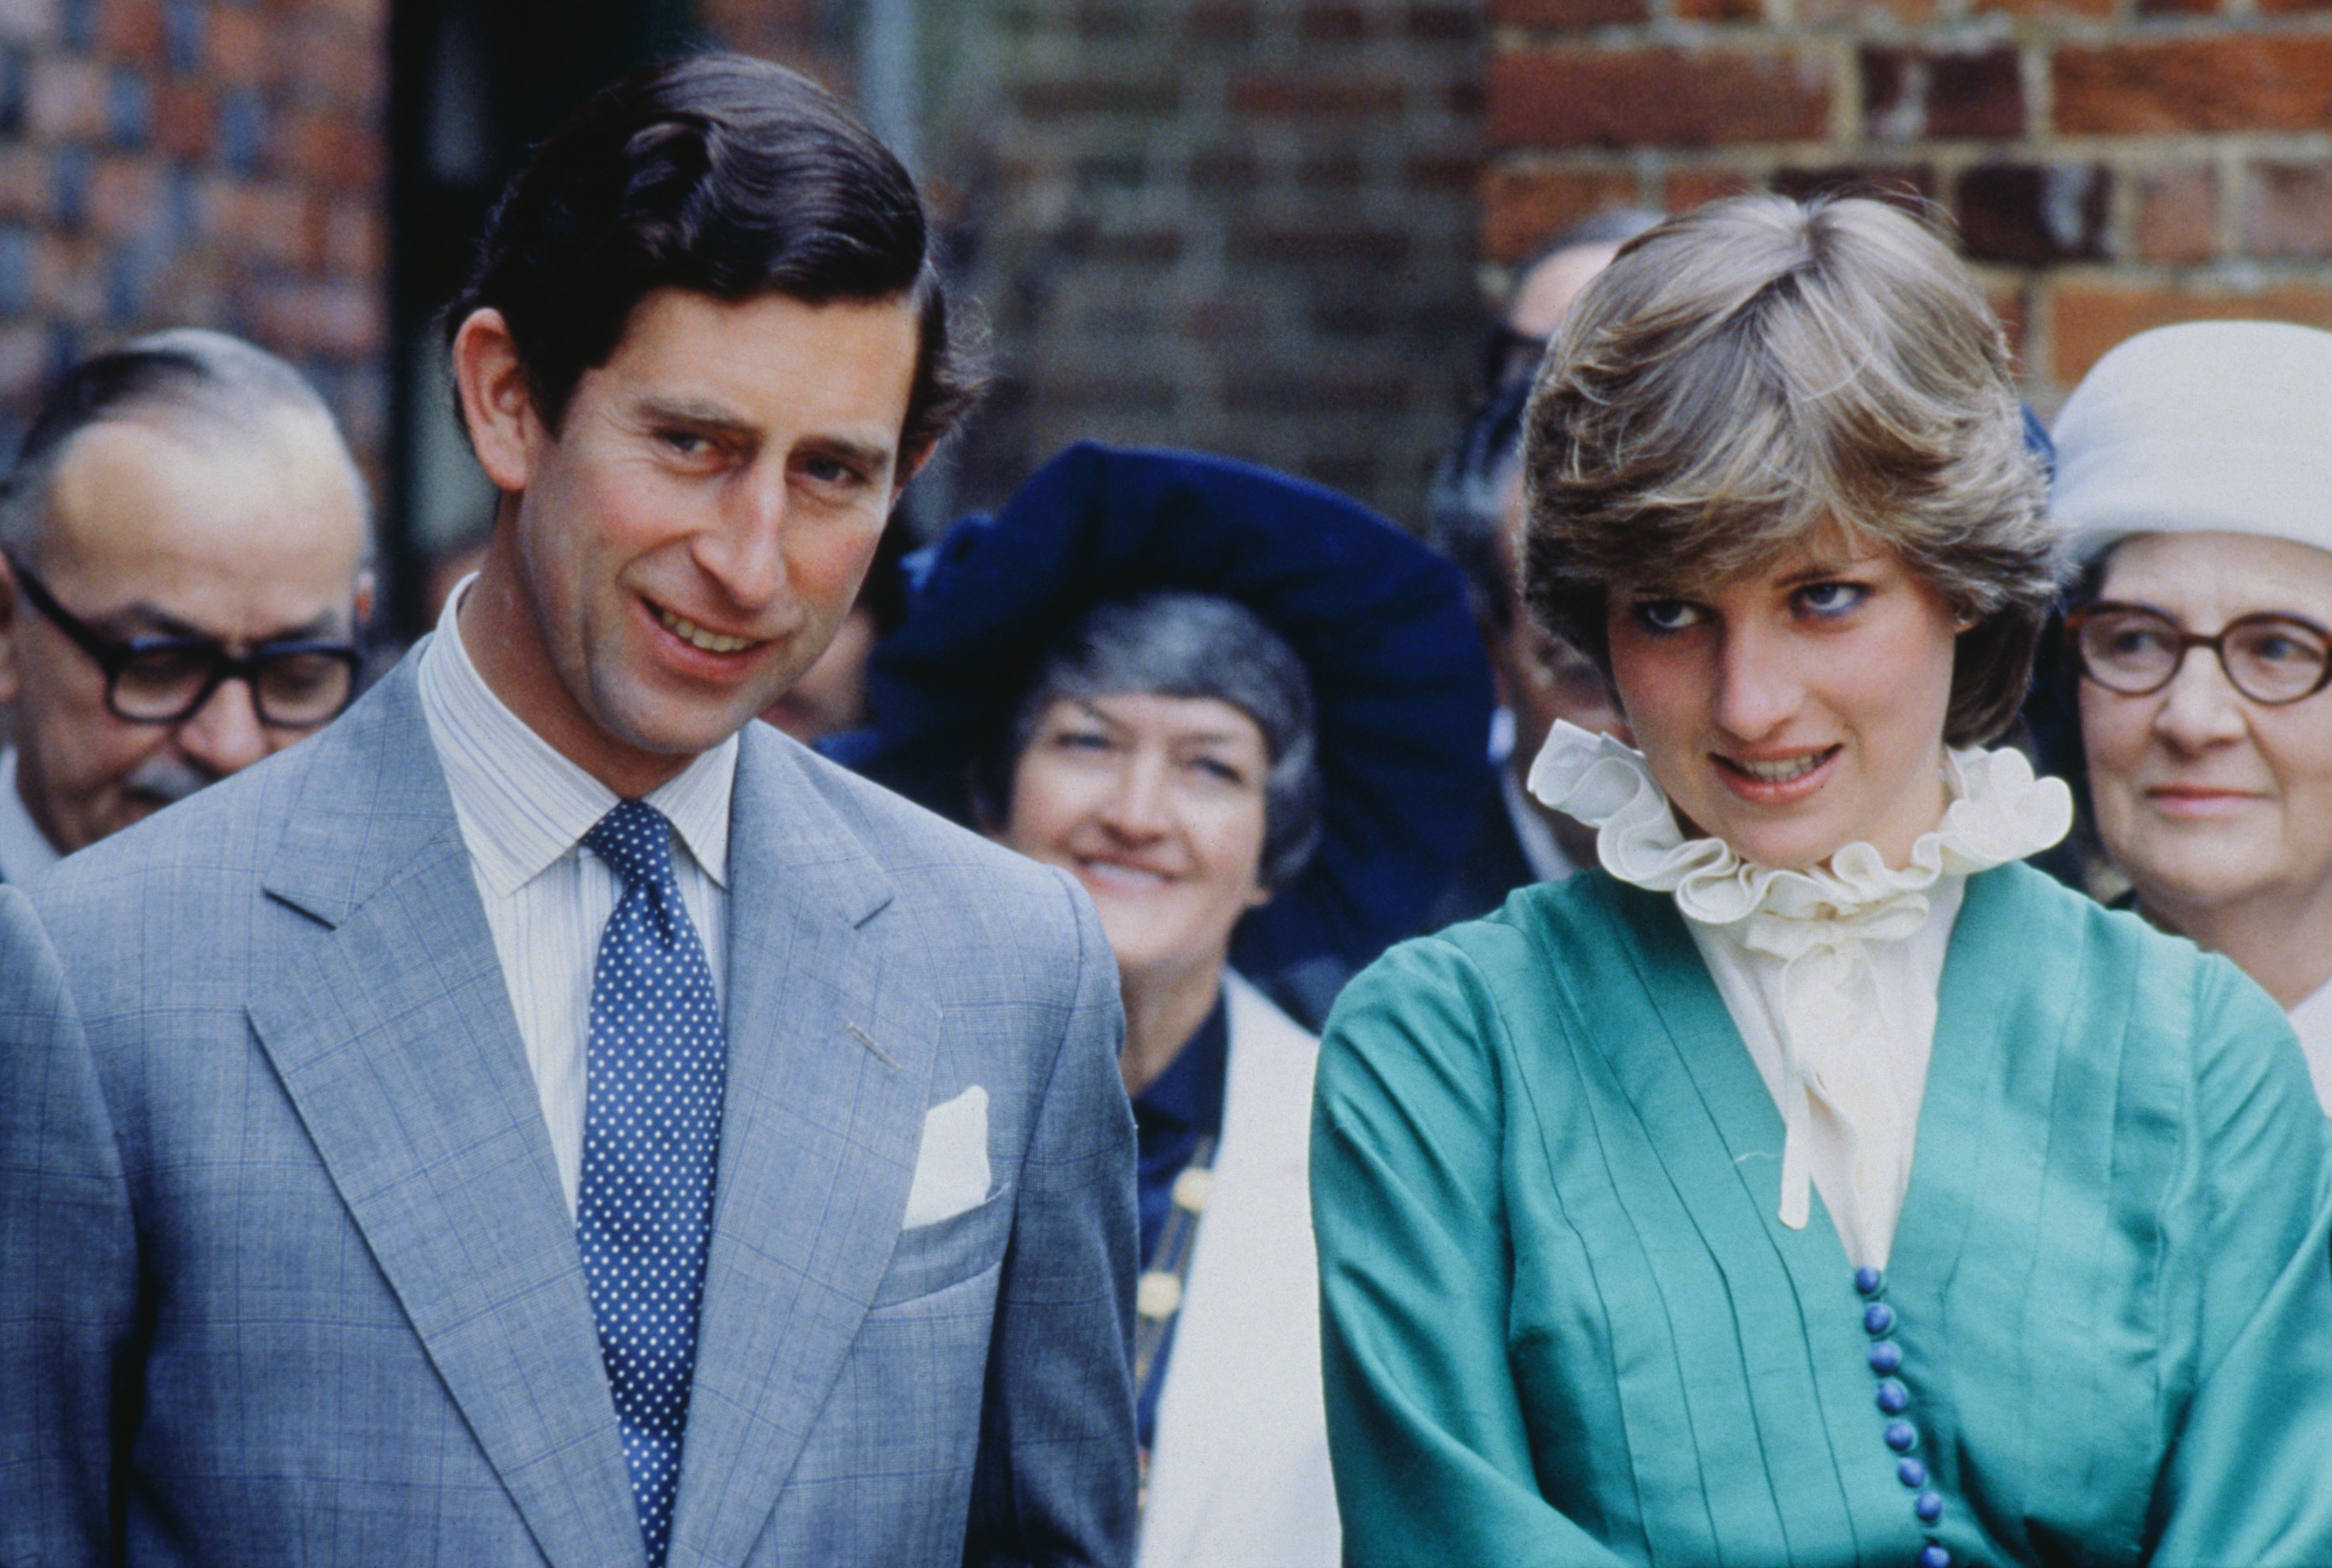 Prince Charles and Lady Diana Spencer opened the Mountbatten Exhibition at Broadlands, the home of Lord Louis Mountbatten, circa 1981 | Source: Getty Images